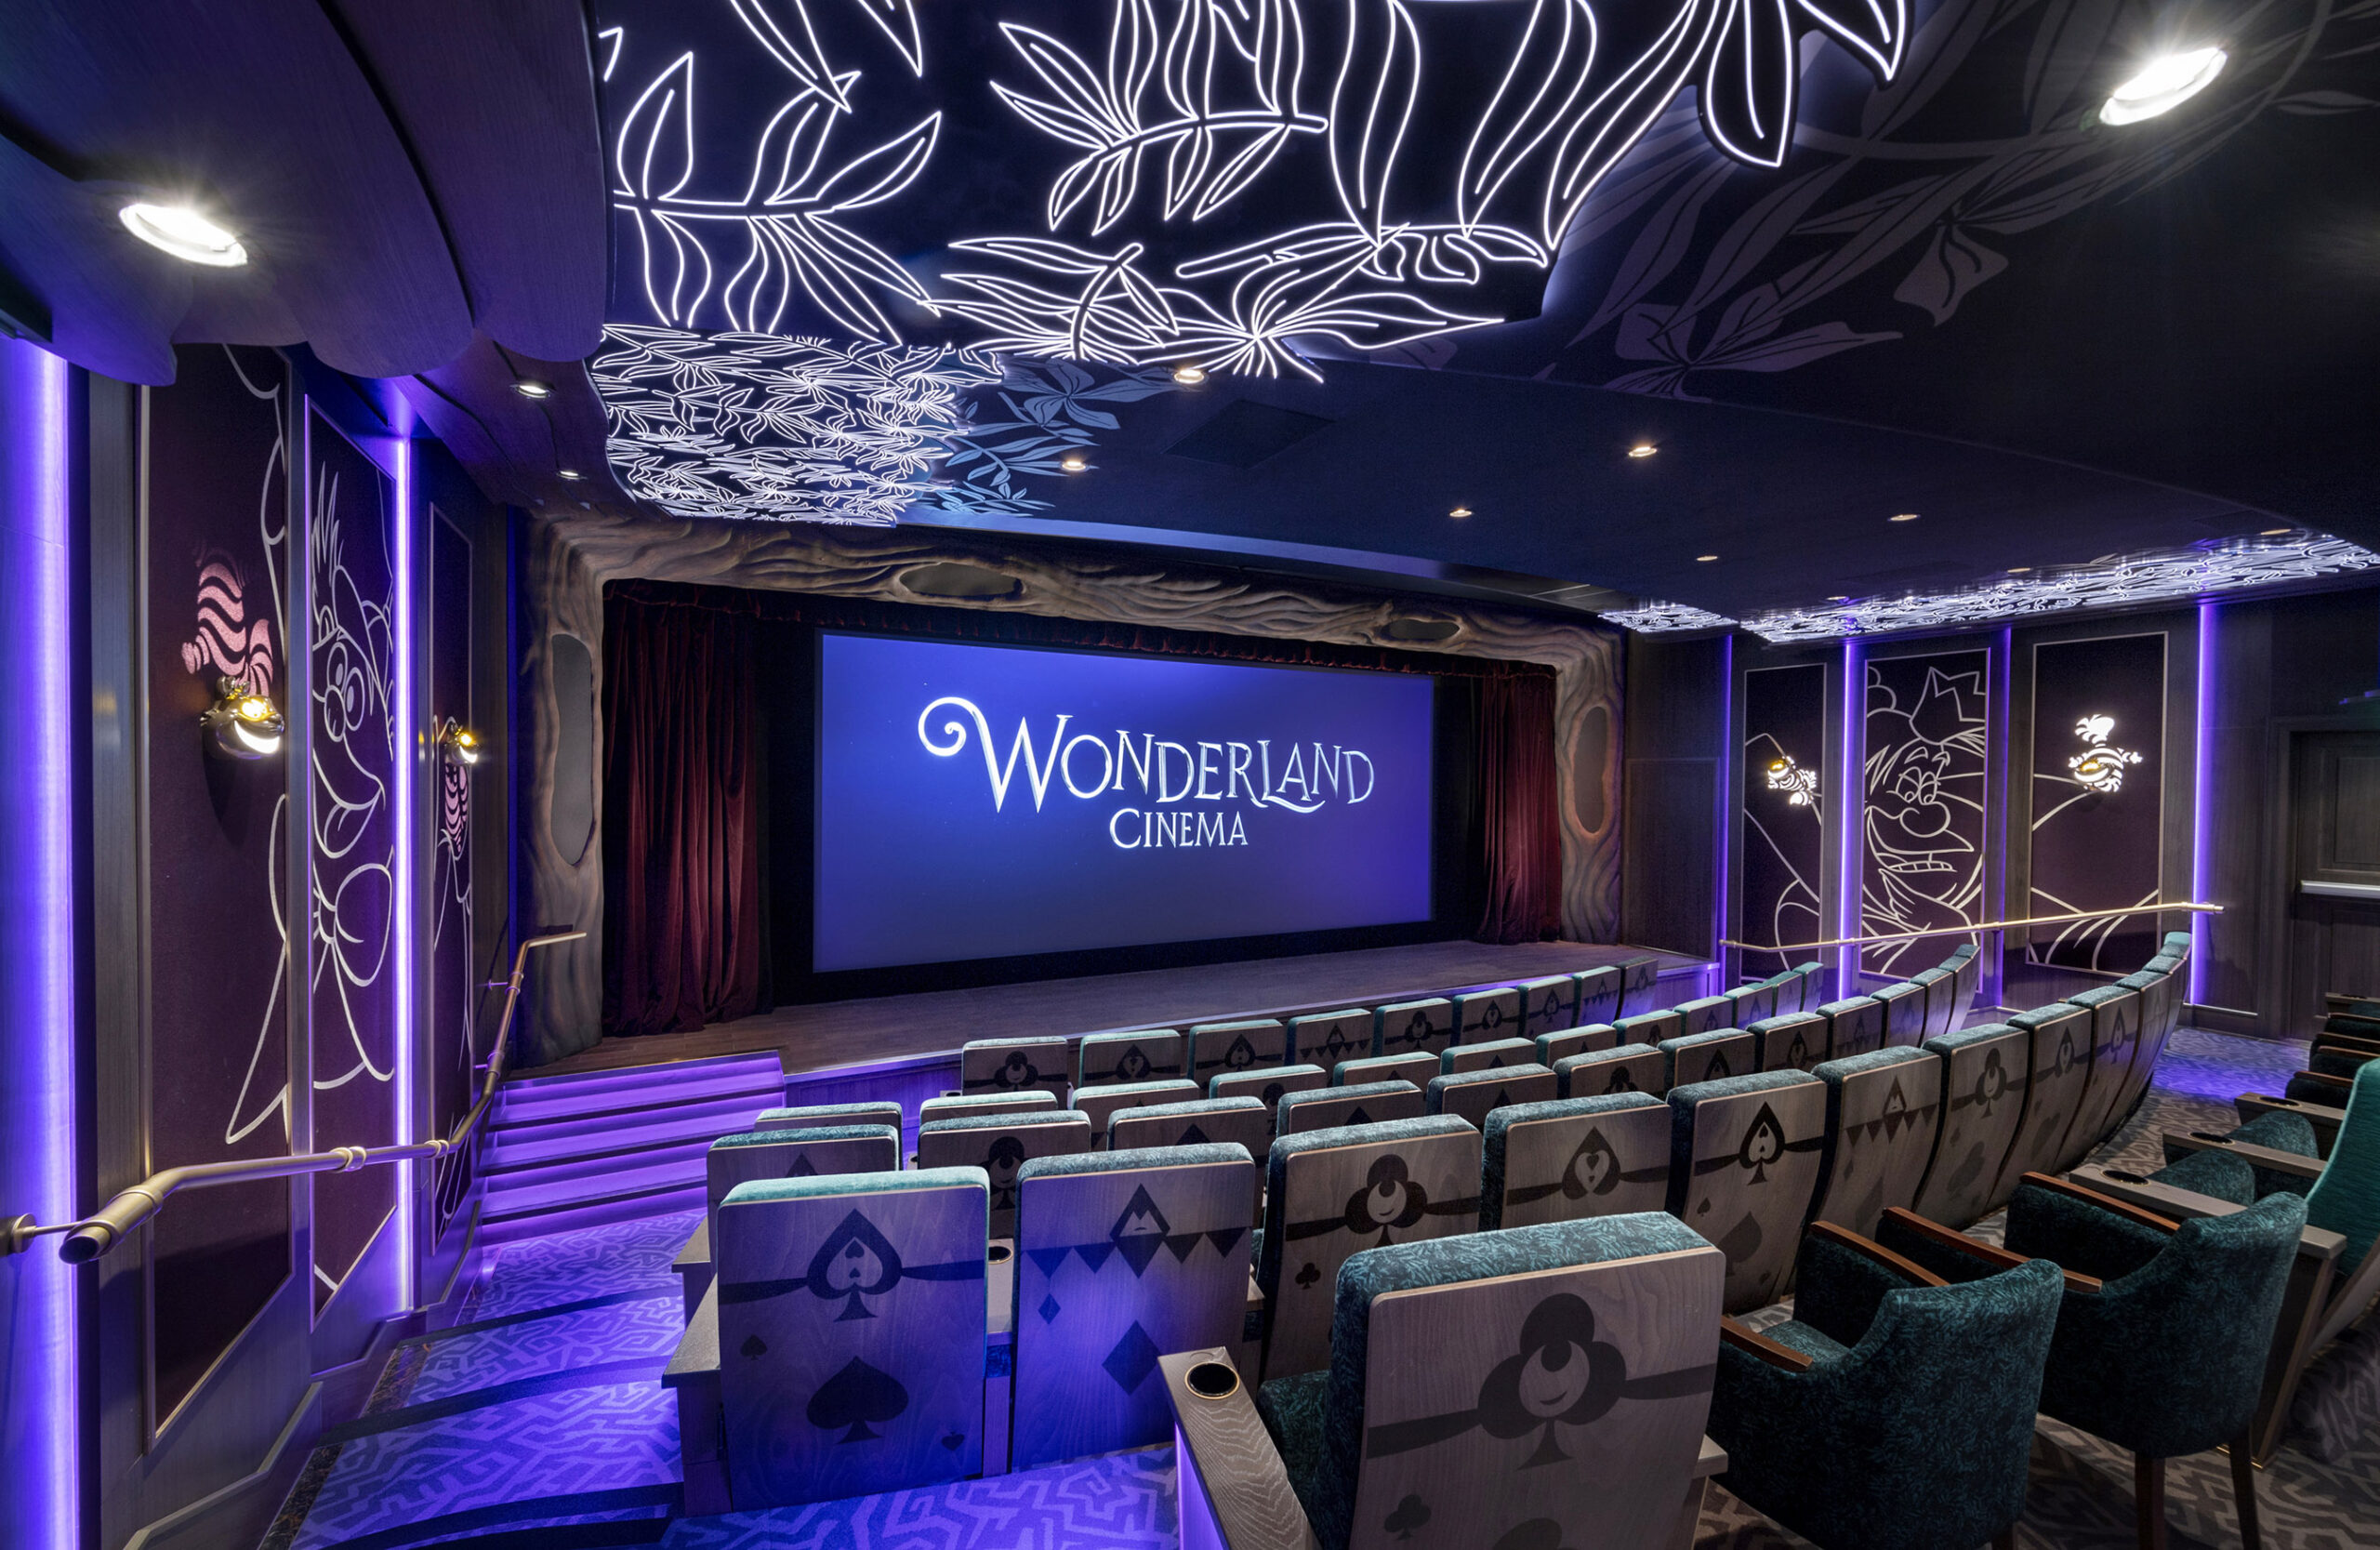 The Wonderland Cinema will be one of two intimate, luxe screening rooms onboard the Disney Treasure that elevate the onboard cinematic experience, featuring the latest visual and audio technology and offering more options than ever before for guests to watch first-run films from Disney, Pixar, Marvel, Lucasfilm and more. (Kent Phillips, photographer)